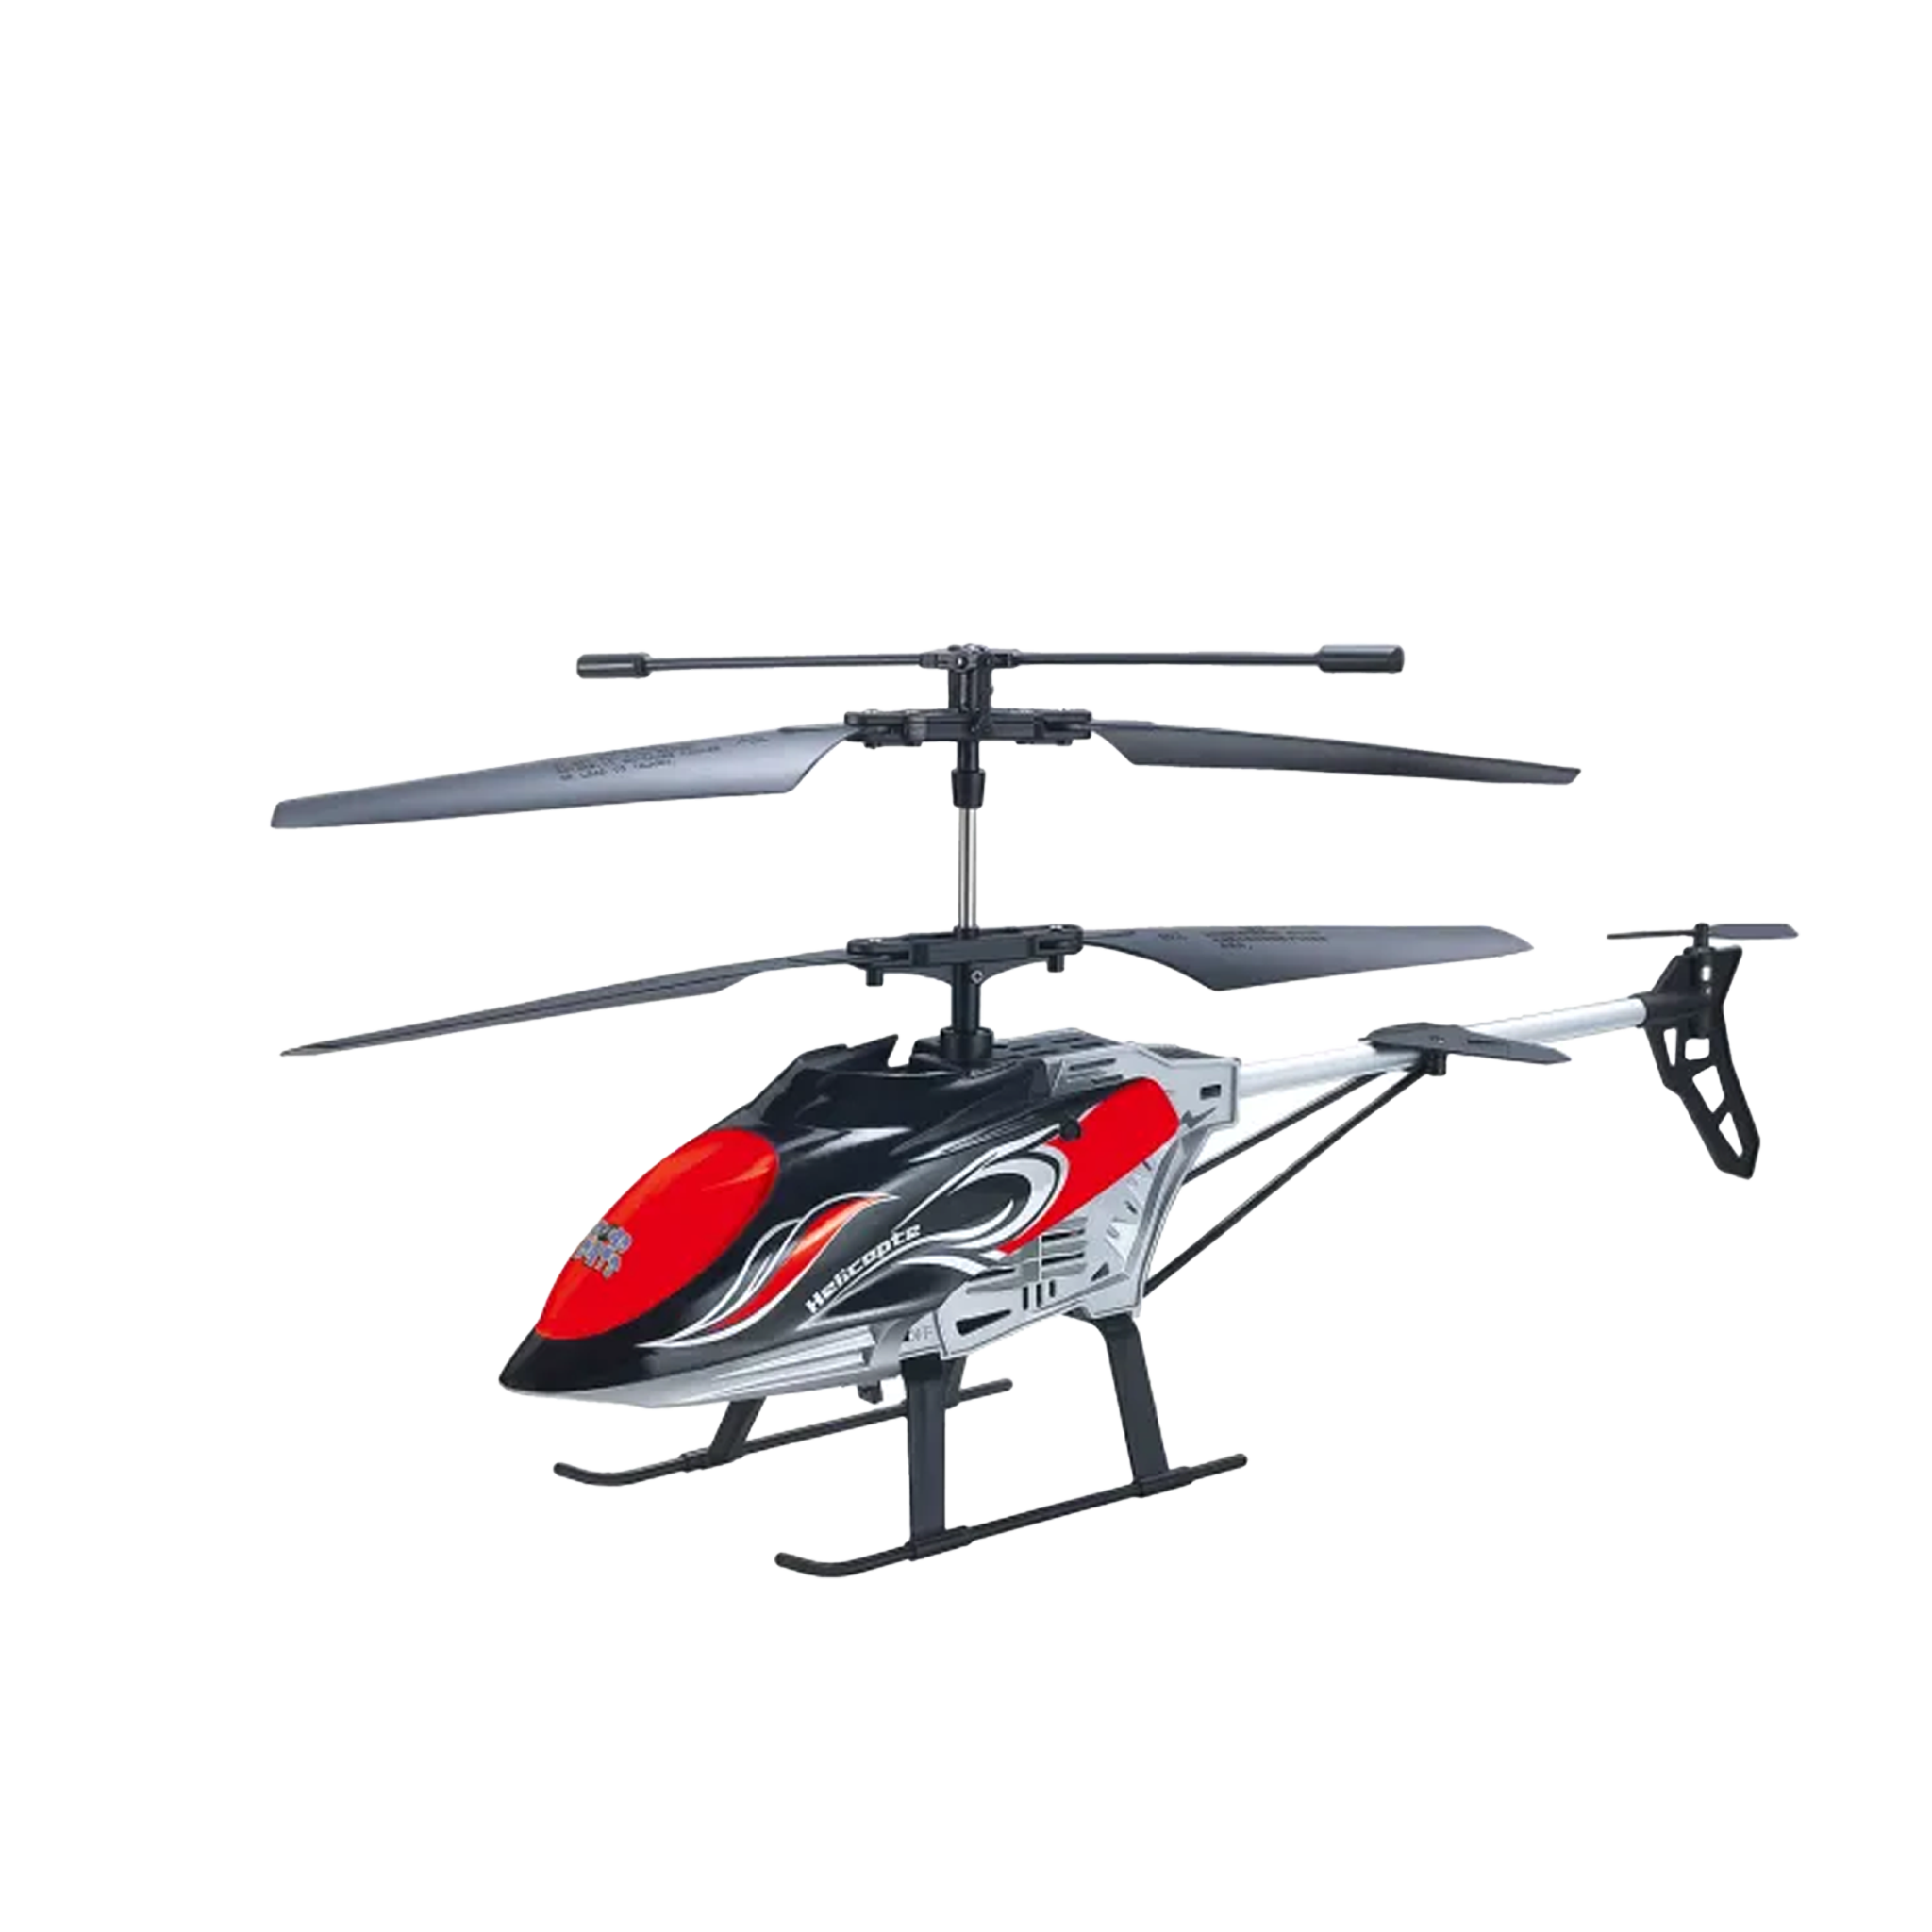 859832 Model Helicopter with Remote Control & Charger